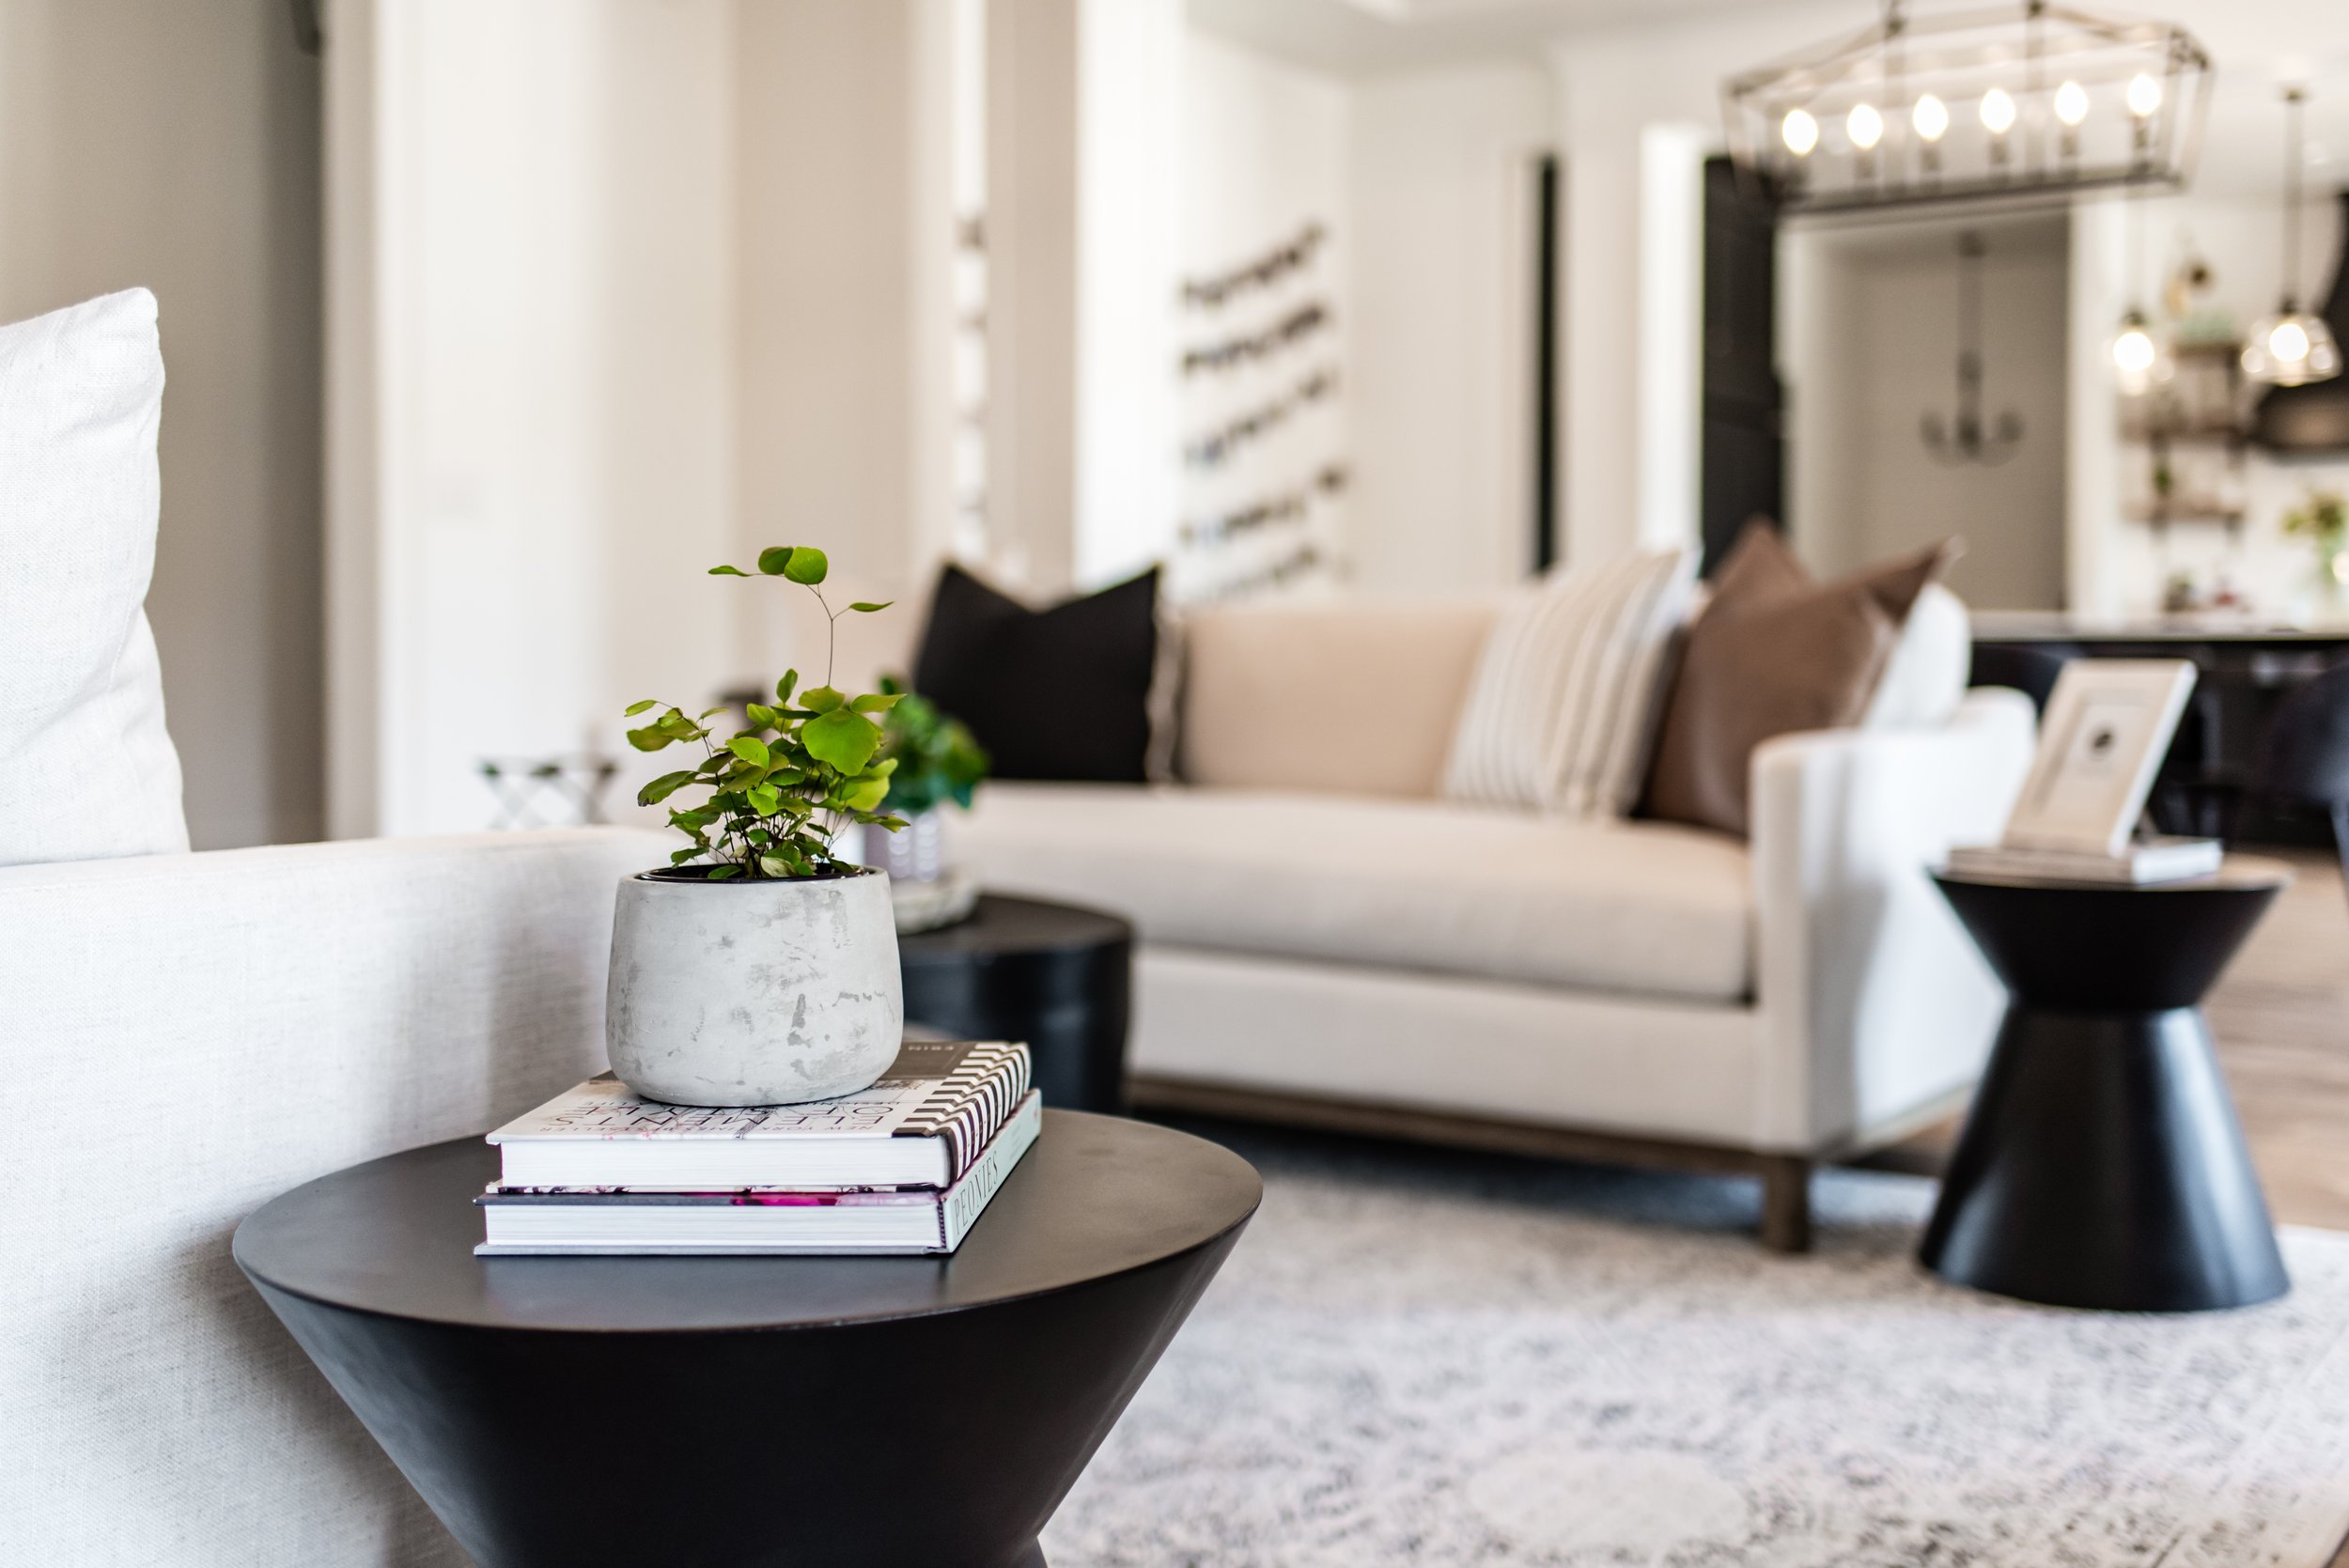  One benefit of working with the Liz Powell Design team is their architecturally driven designs ensure your home will give a lovely first impression for years to come. #InteriorDesign #CacheValleyHomes #LizPowellDesign #BuildACohesiveHome #FullServic